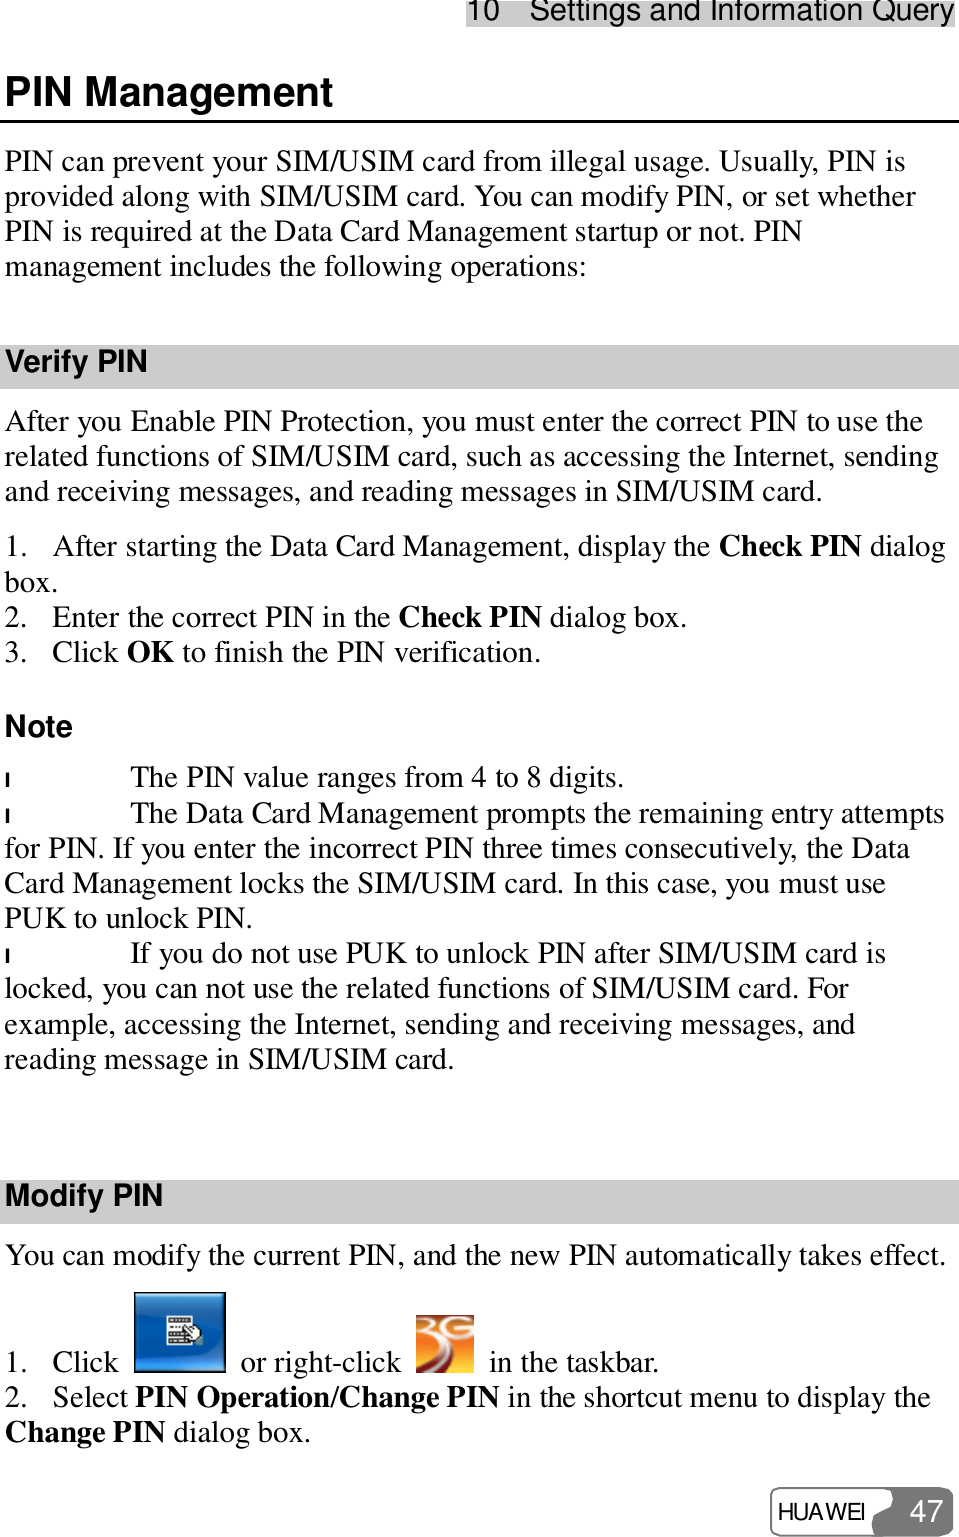 10  Settings and Information Query HUAWEI  47 PIN Management PIN can prevent your SIM/USIM card from illegal usage. Usually, PIN is provided along with SIM/USIM card. You can modify PIN, or set whether PIN is required at the Data Card Management startup or not. PIN management includes the following operations: Verify PIN After you Enable PIN Protection, you must enter the correct PIN to use the related functions of SIM/USIM card, such as accessing the Internet, sending and receiving messages, and reading messages in SIM/USIM card. 1. After starting the Data Card Management, display the Check PIN dialog box. 2. Enter the correct PIN in the Check PIN dialog box. 3. Click OK to finish the PIN verification. Note  l The PIN value ranges from 4 to 8 digits. l The Data Card Management prompts the remaining entry attempts for PIN. If you enter the incorrect PIN three times consecutively, the Data Card Management locks the SIM/USIM card. In this case, you must use PUK to unlock PIN. l If you do not use PUK to unlock PIN after SIM/USIM card is locked, you can not use the related functions of SIM/USIM card. For example, accessing the Internet, sending and receiving messages, and reading message in SIM/USIM card.  Modify PIN You can modify the current PIN, and the new PIN automatically takes effect. 1. Click   or right-click   in the taskbar. 2. Select PIN Operation/Change PIN in the shortcut menu to display the Change PIN dialog box. 